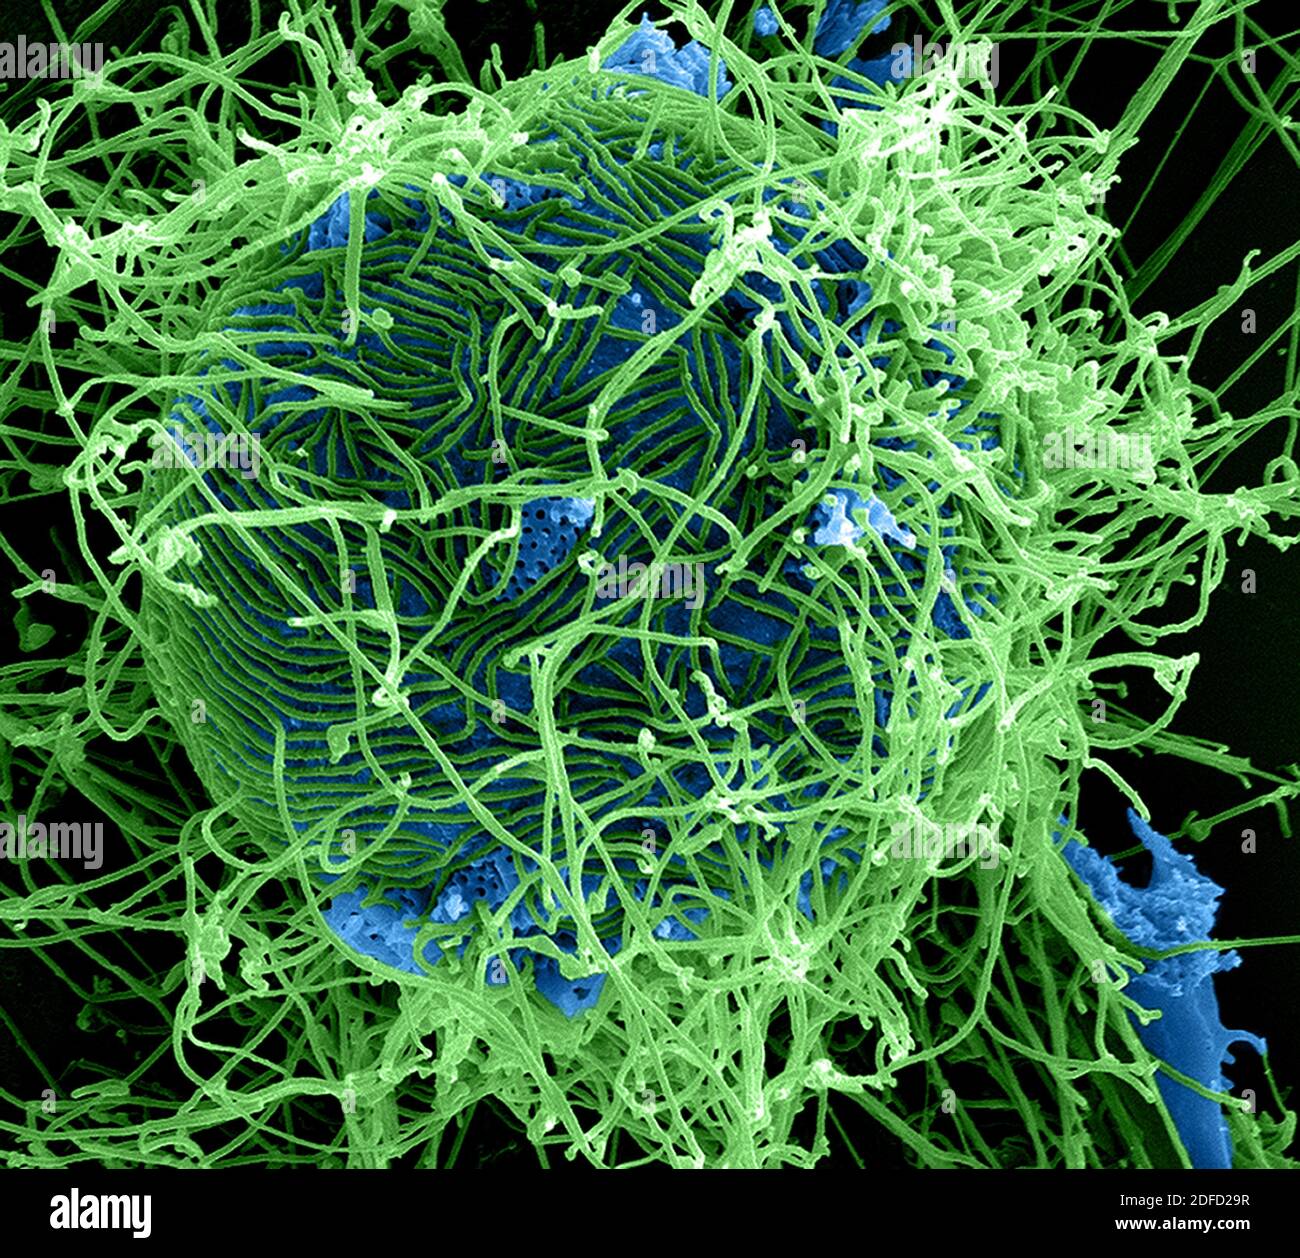 Colorized scanning electron micrograph of filamentous. Ebola virus particles (green) attached to and budding from. a chronically infected VERO E6 cell Stock Photo